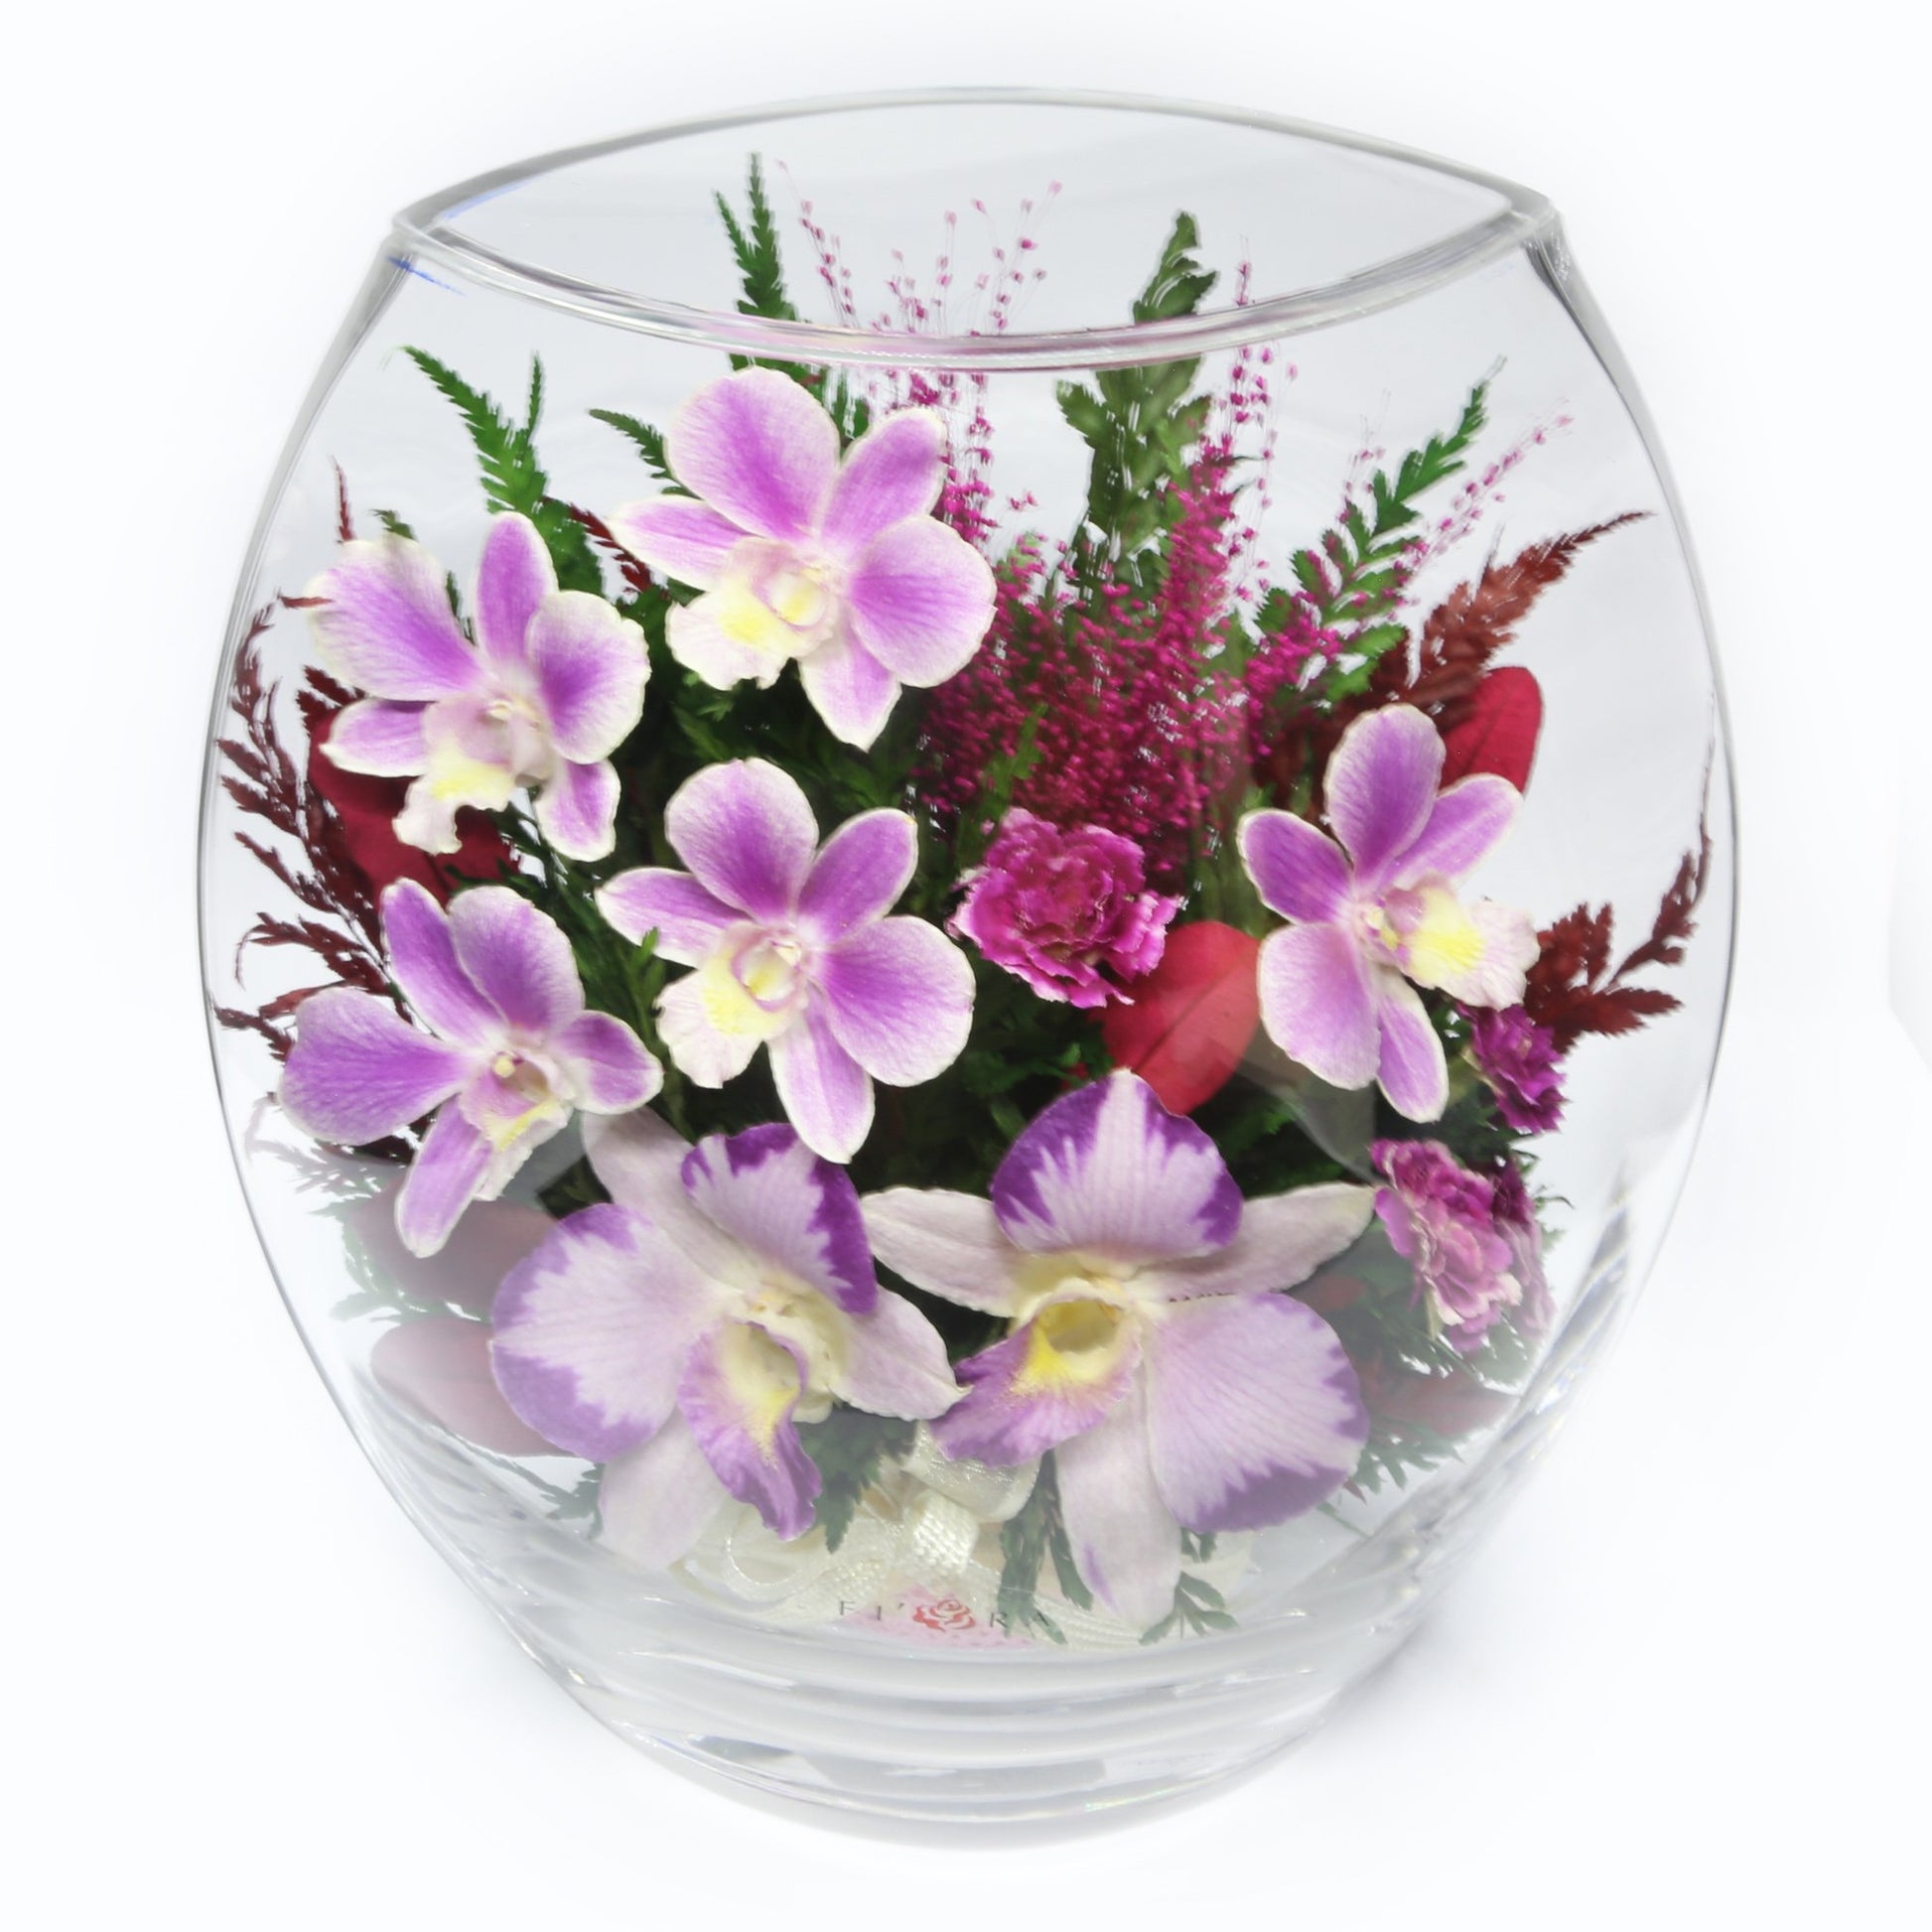 35753 Long-Lasting Purple Orchids,  Limoniums with Greenery in a Flat Rugby Glass Vase - FIORA FLOWER